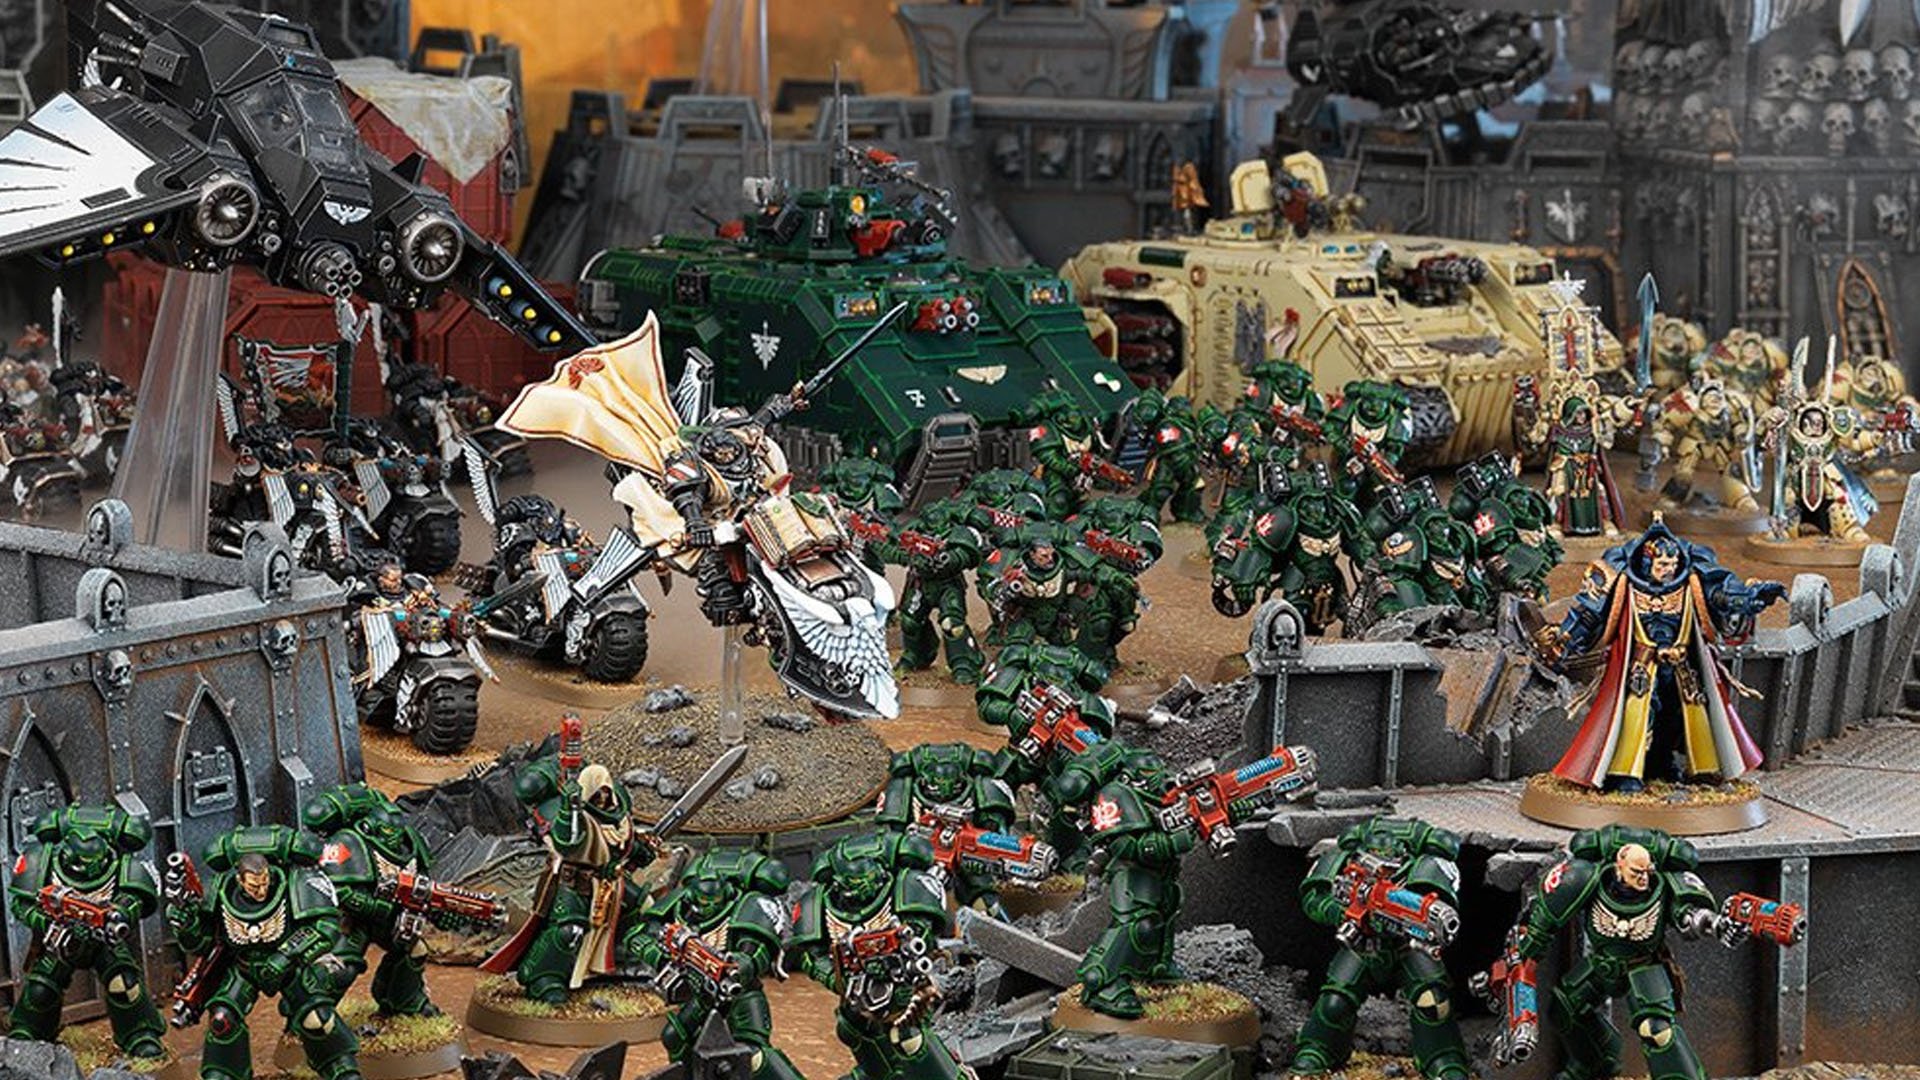 Warhammer 40k Dark Angels Space Marine army on display with painted models (photo from Games Workshop)